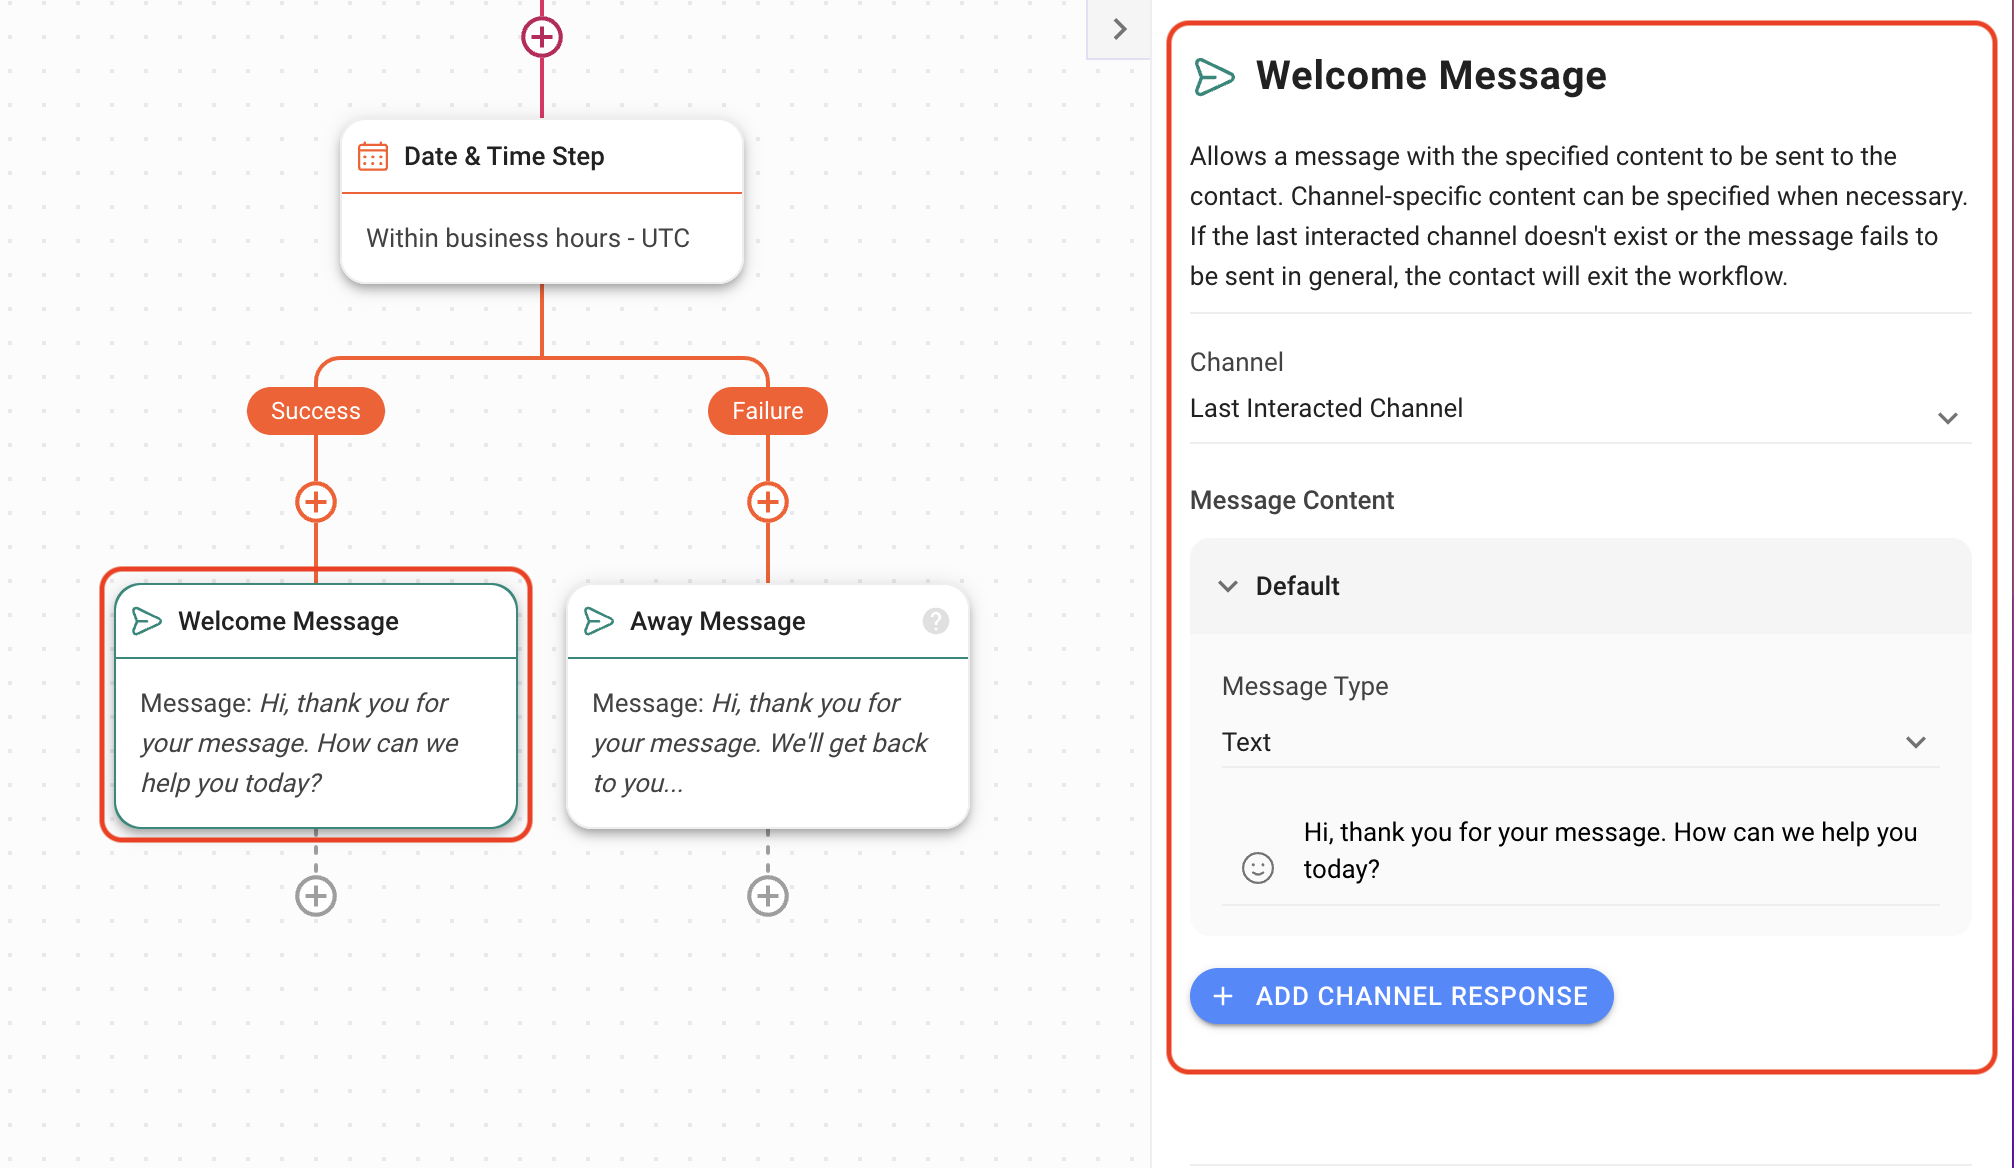 screenshot of workflow to send a welcome message during business hours